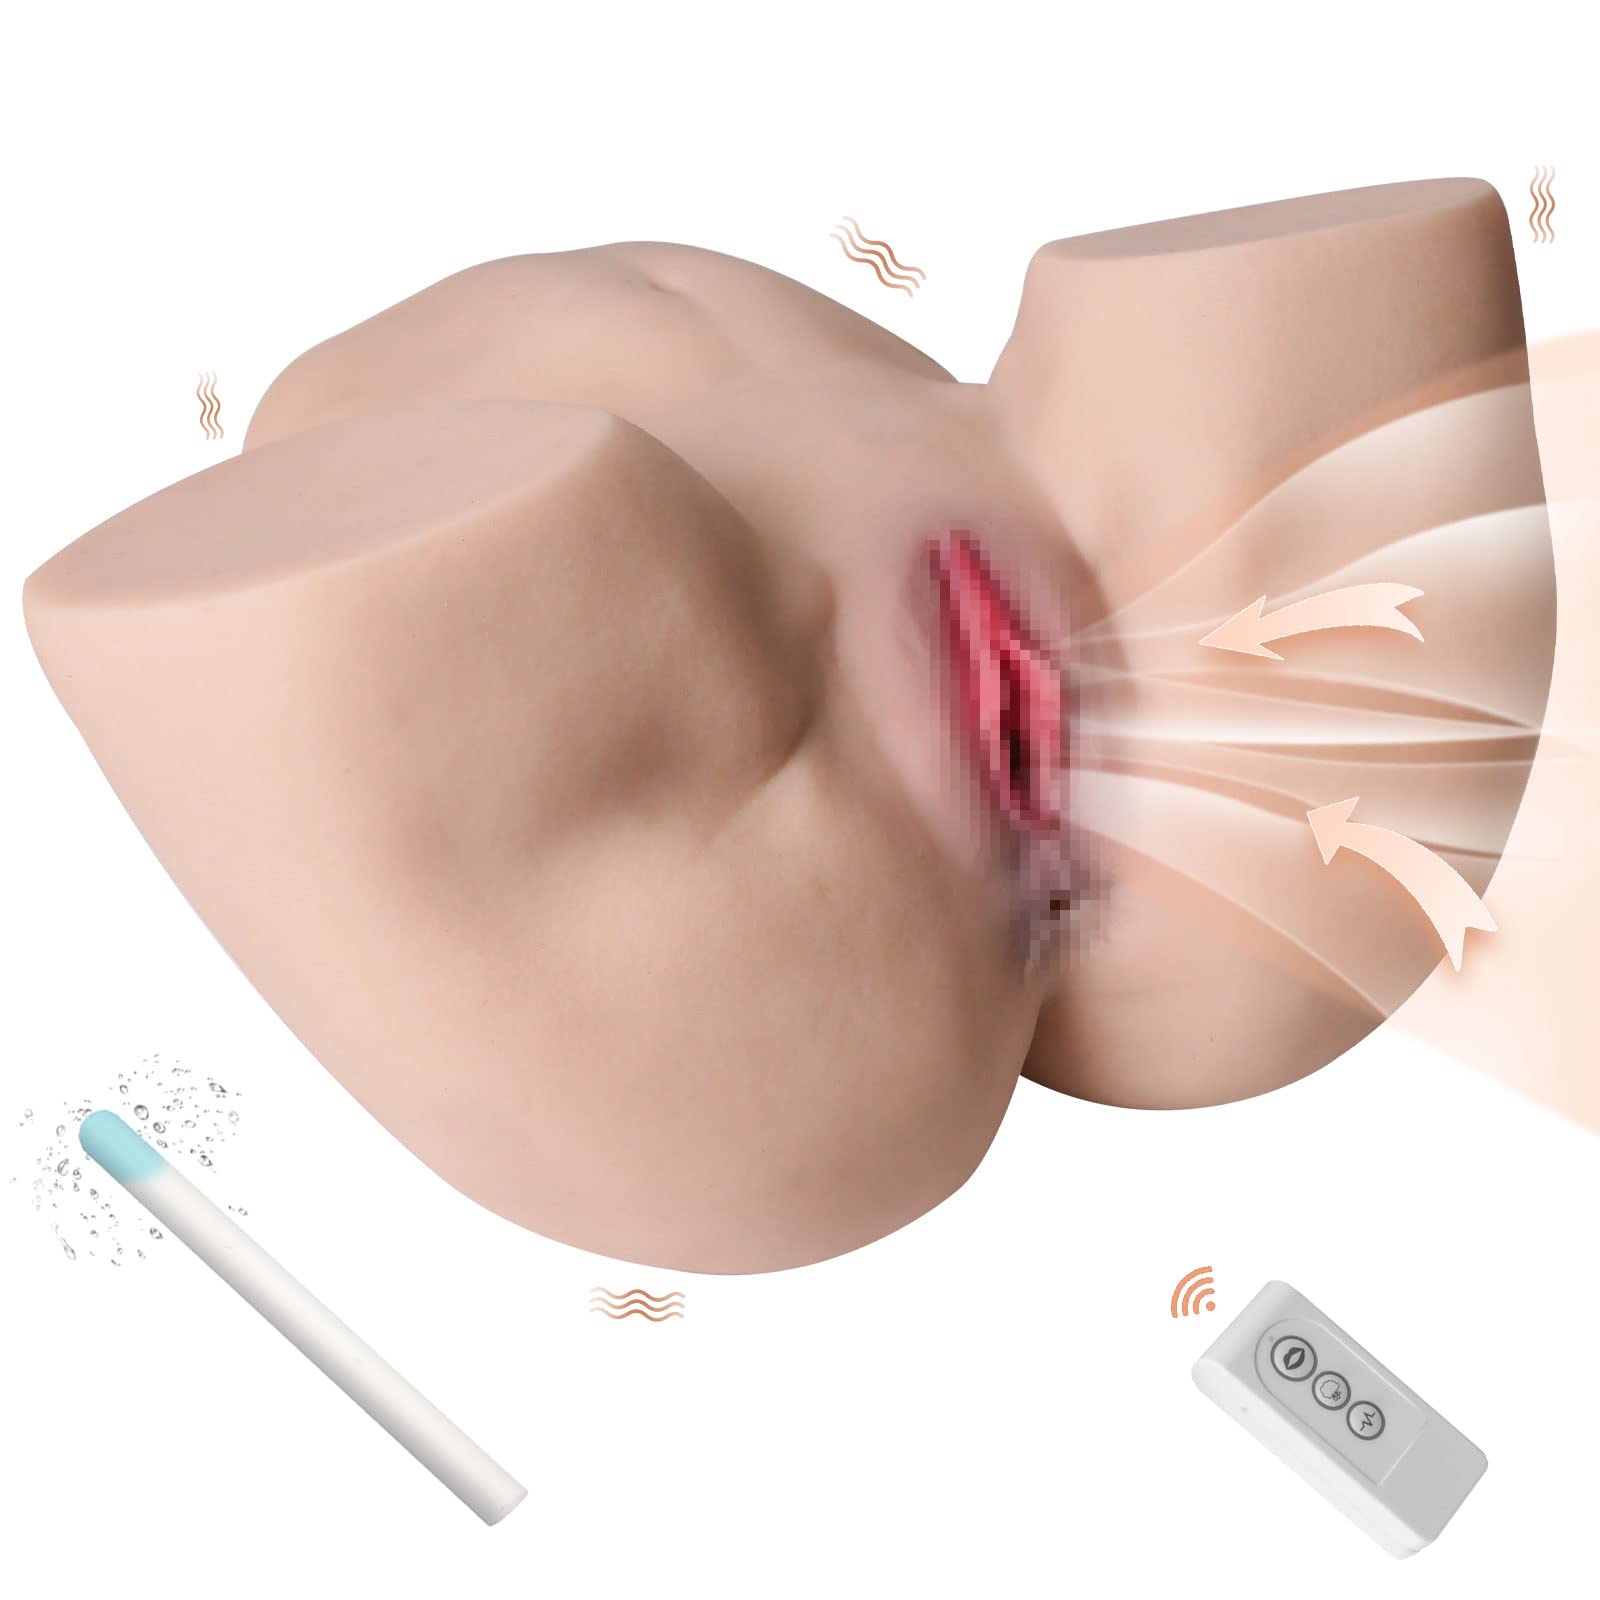 2022 New Upgraded 13LB Adult Butt Doll with 5 Suction Vibrations